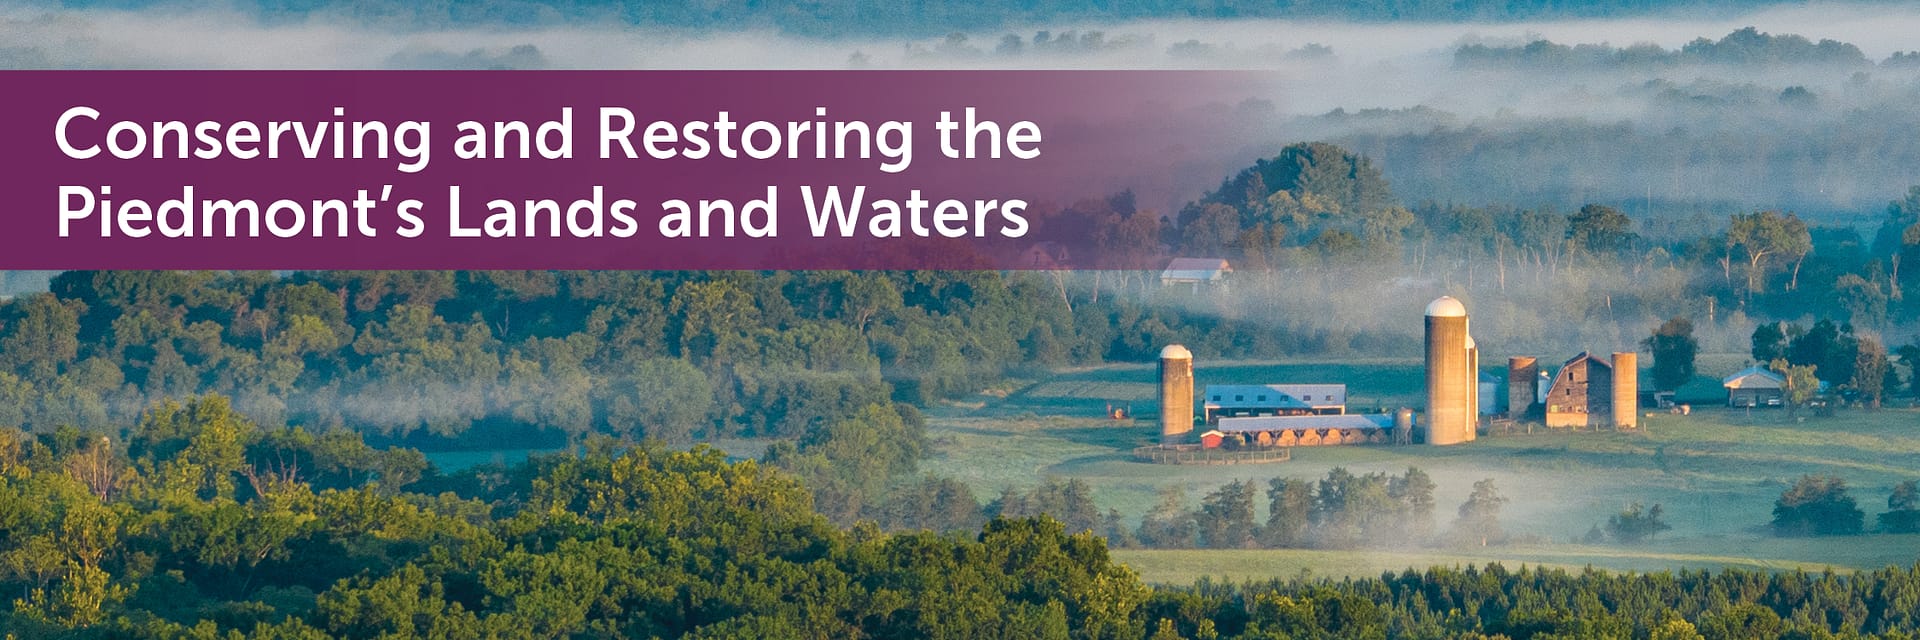 Conserving and Restoring the Piedmont’s Lands and Waters